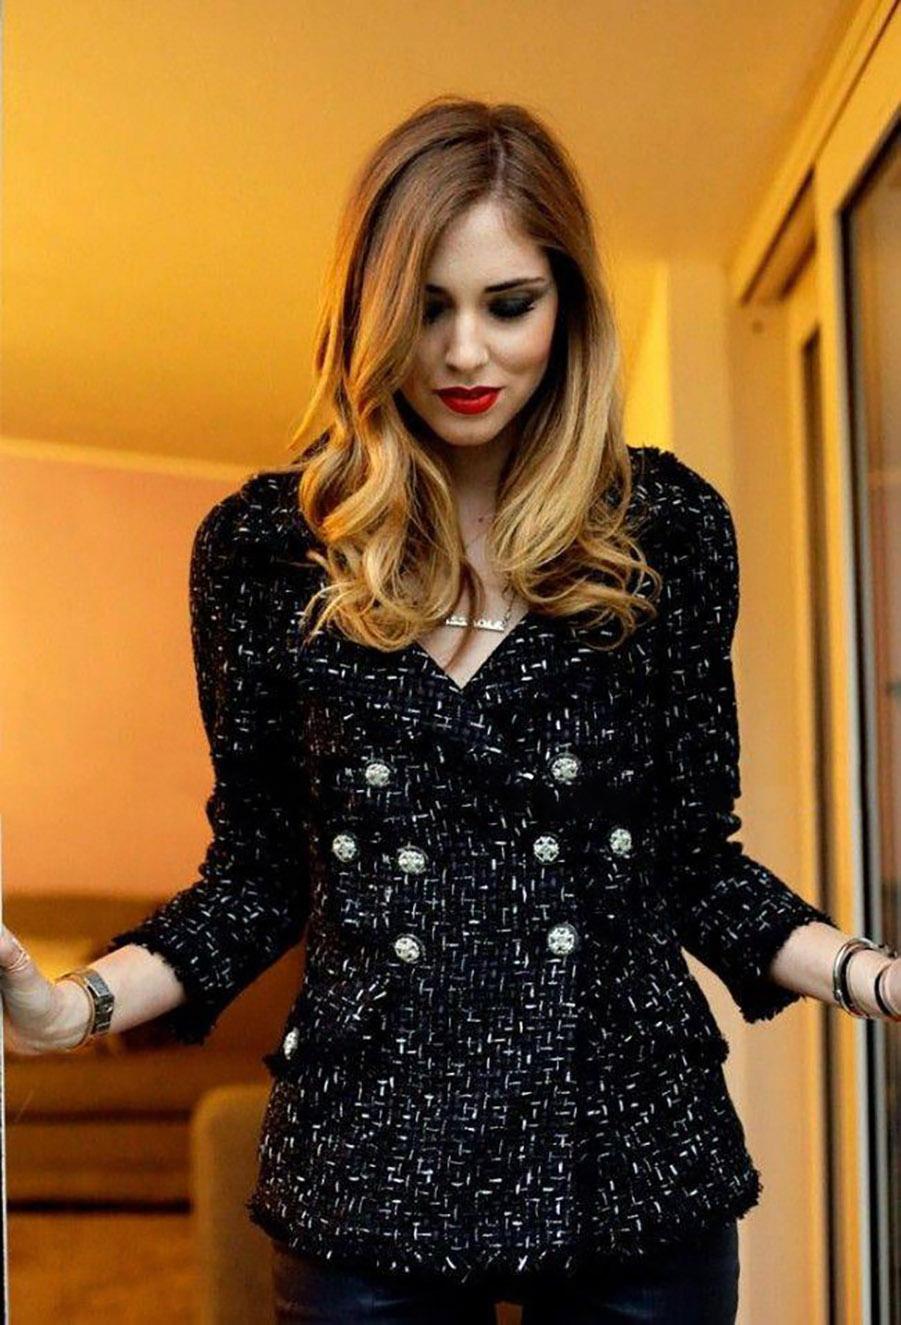 Stunning Chanel Logo Ribbon black tweed jacket as seen on Chiara Ferragni!
From famous Paris / Versailles Cruise Collection.
- masterpiece CC logo jewel baroque style buttons
- most precious ribbon tweed
- fulls silk lining
Size mark 40 fr. Kept